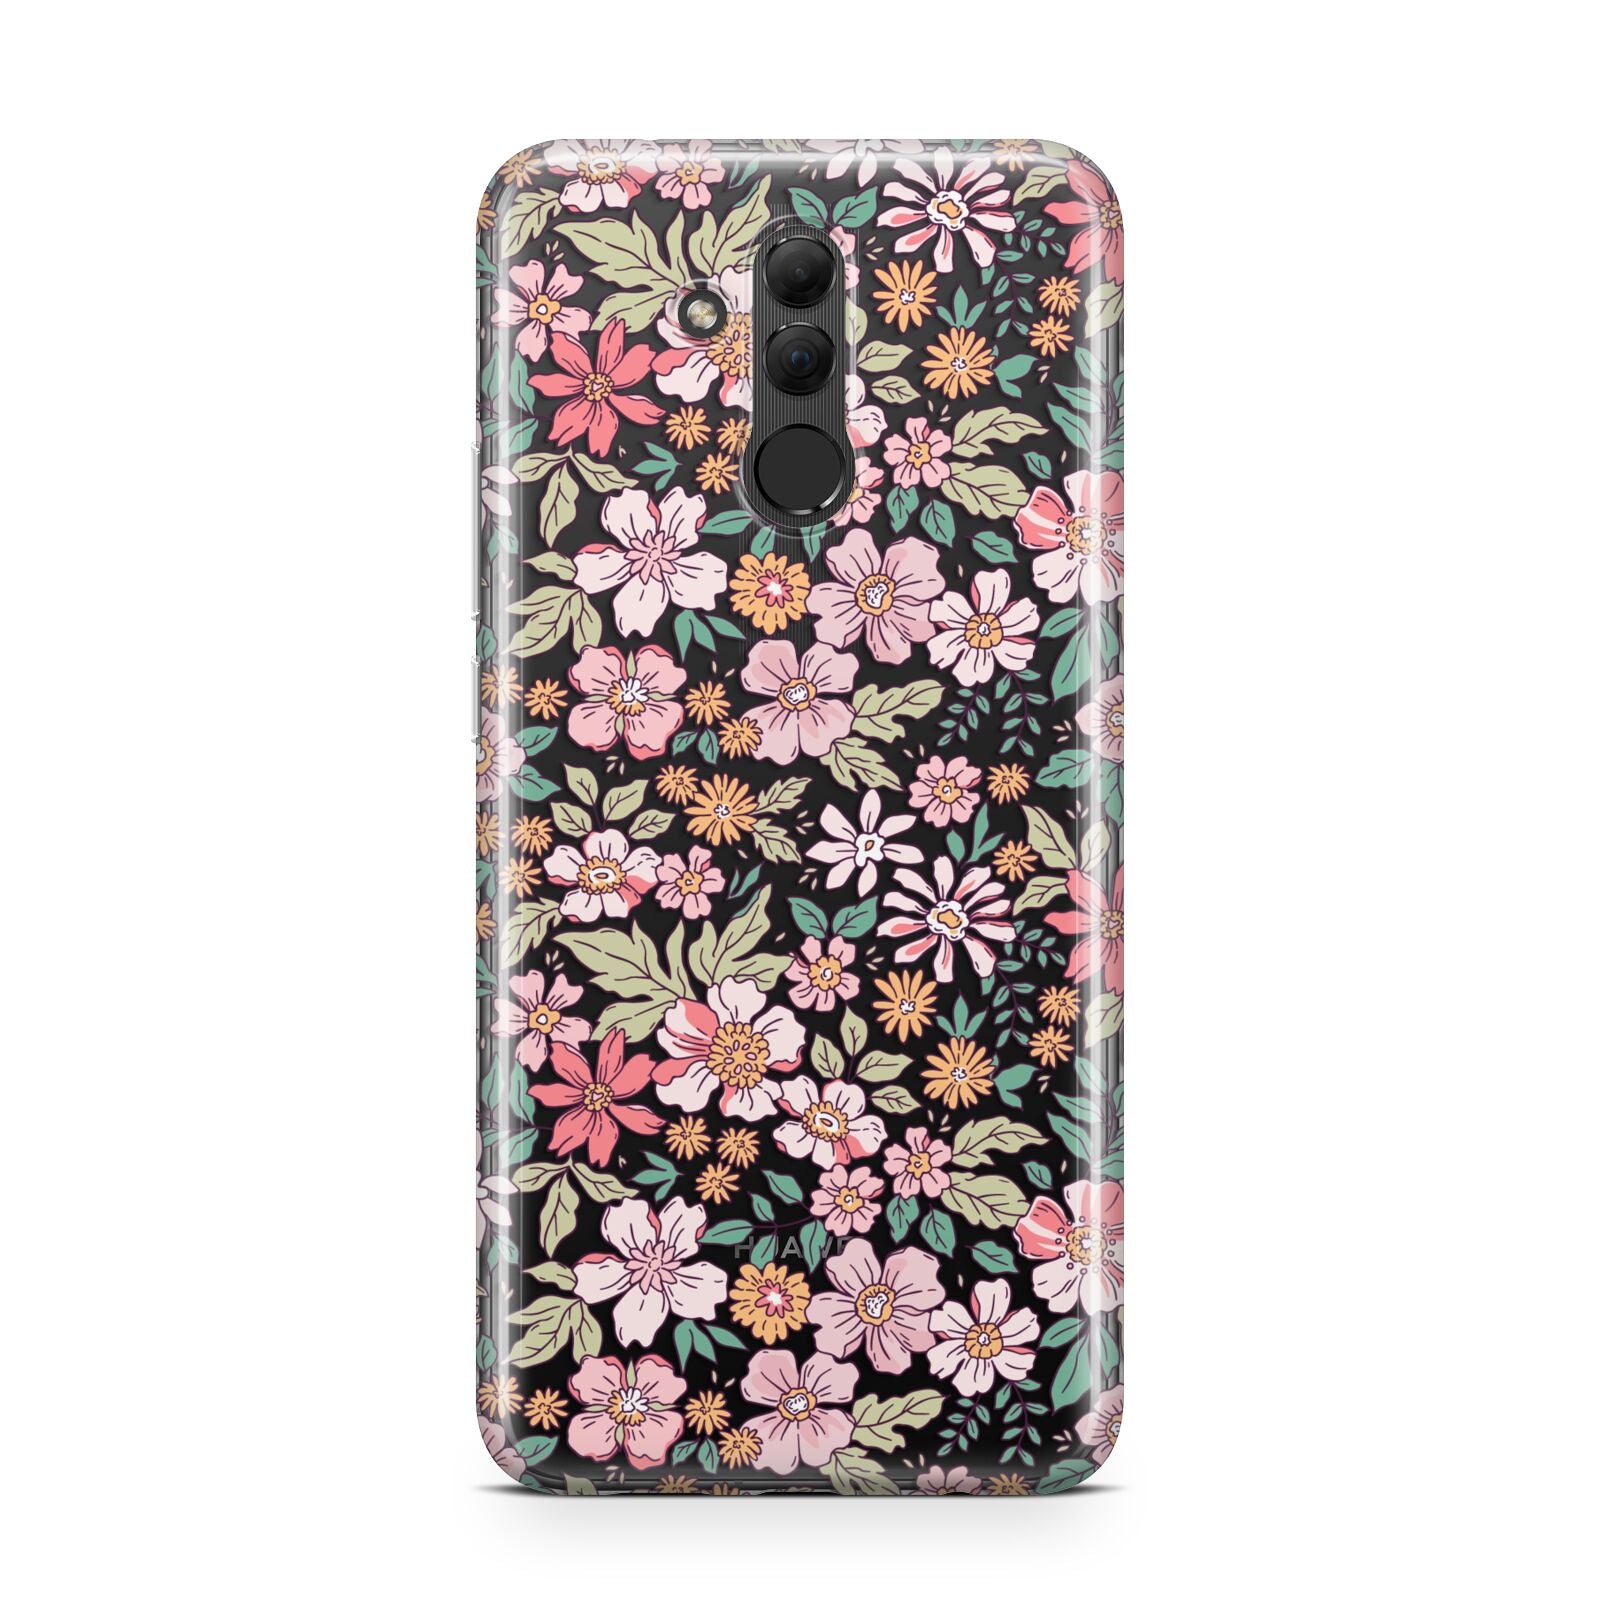 Small Floral Pattern Huawei Mate 20 Lite